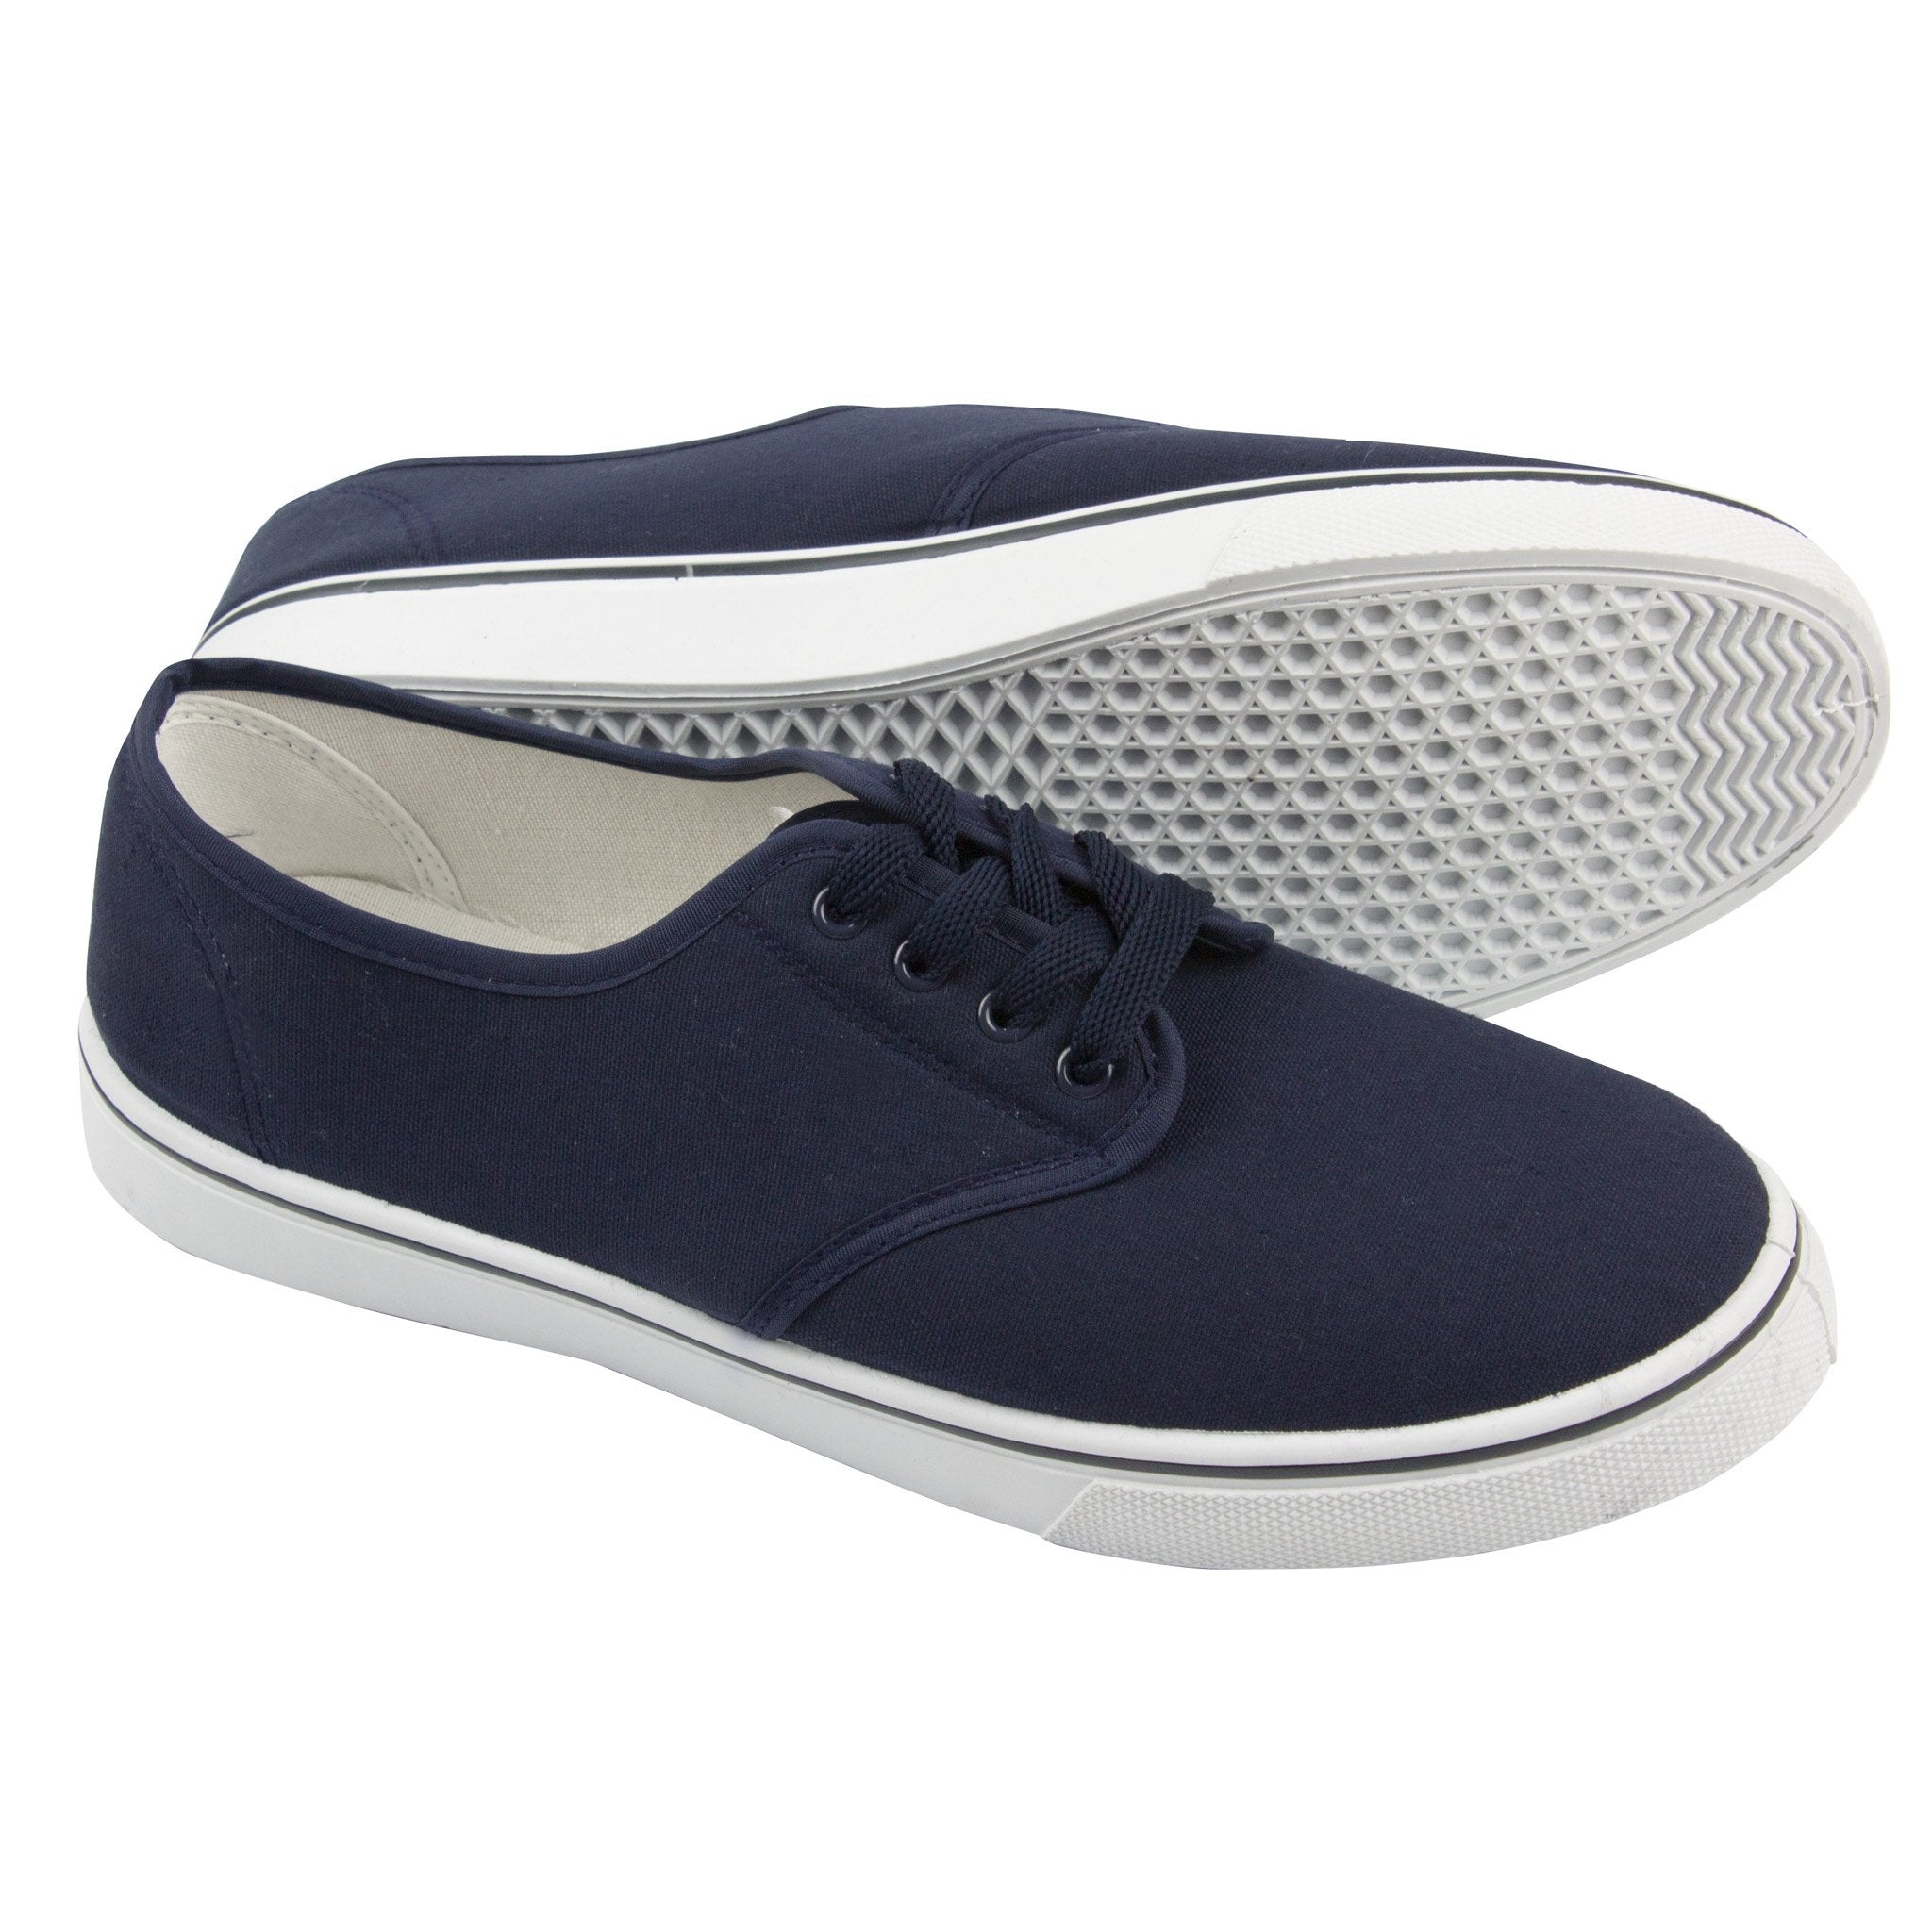 Yachtmaster Lace-up Canvas Deck Shoe